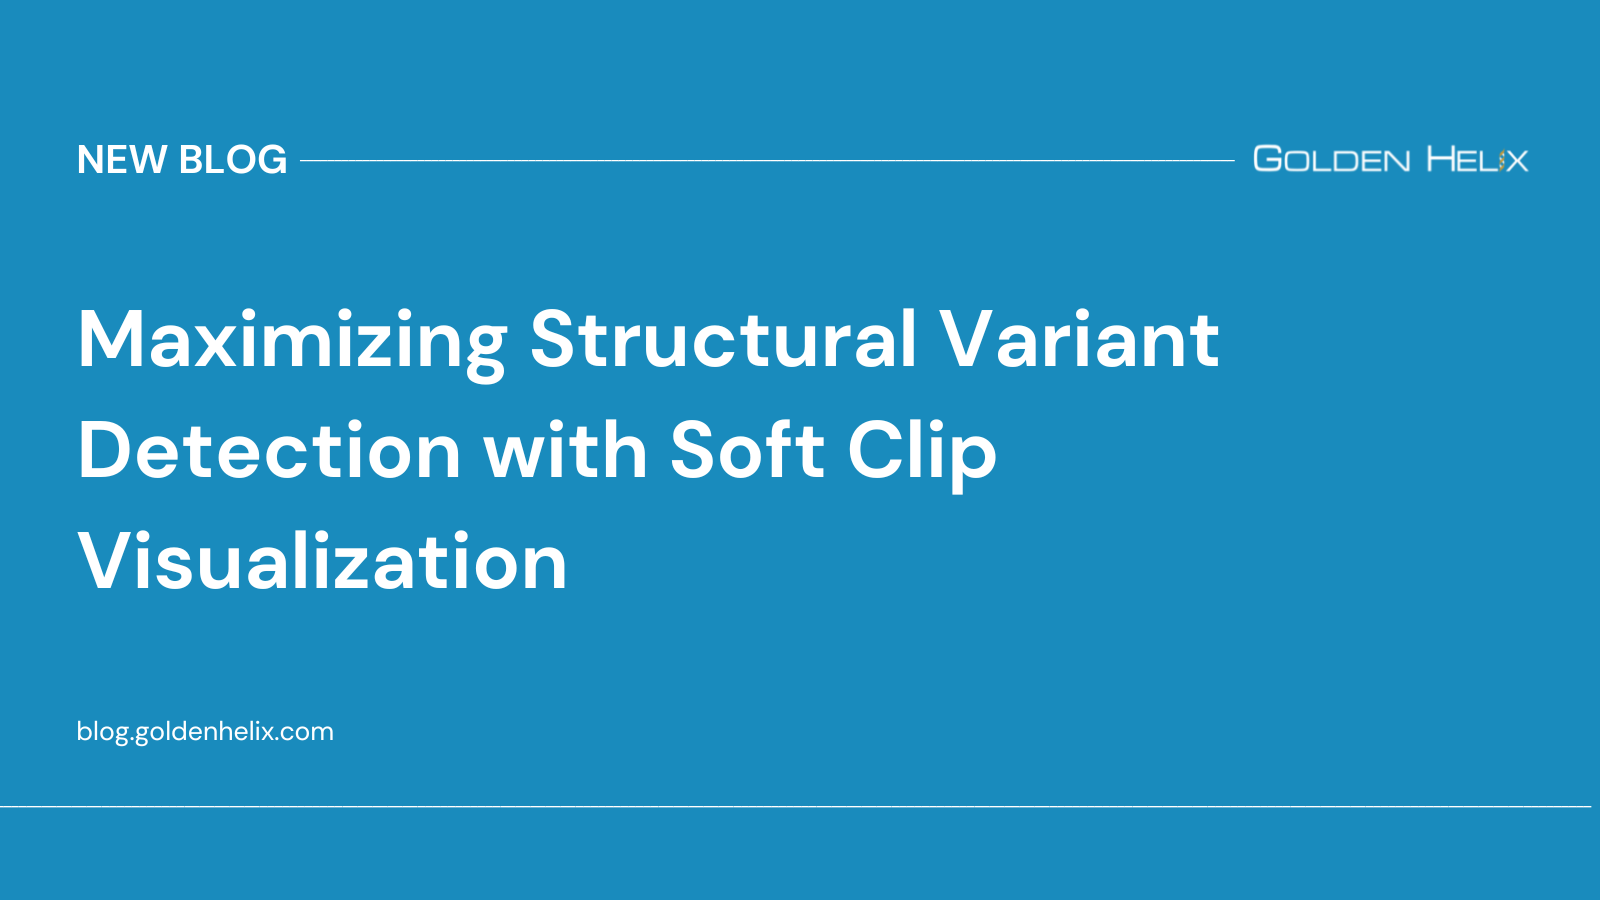 Maximizing Structural Variant Detection with Soft Clip Visualization